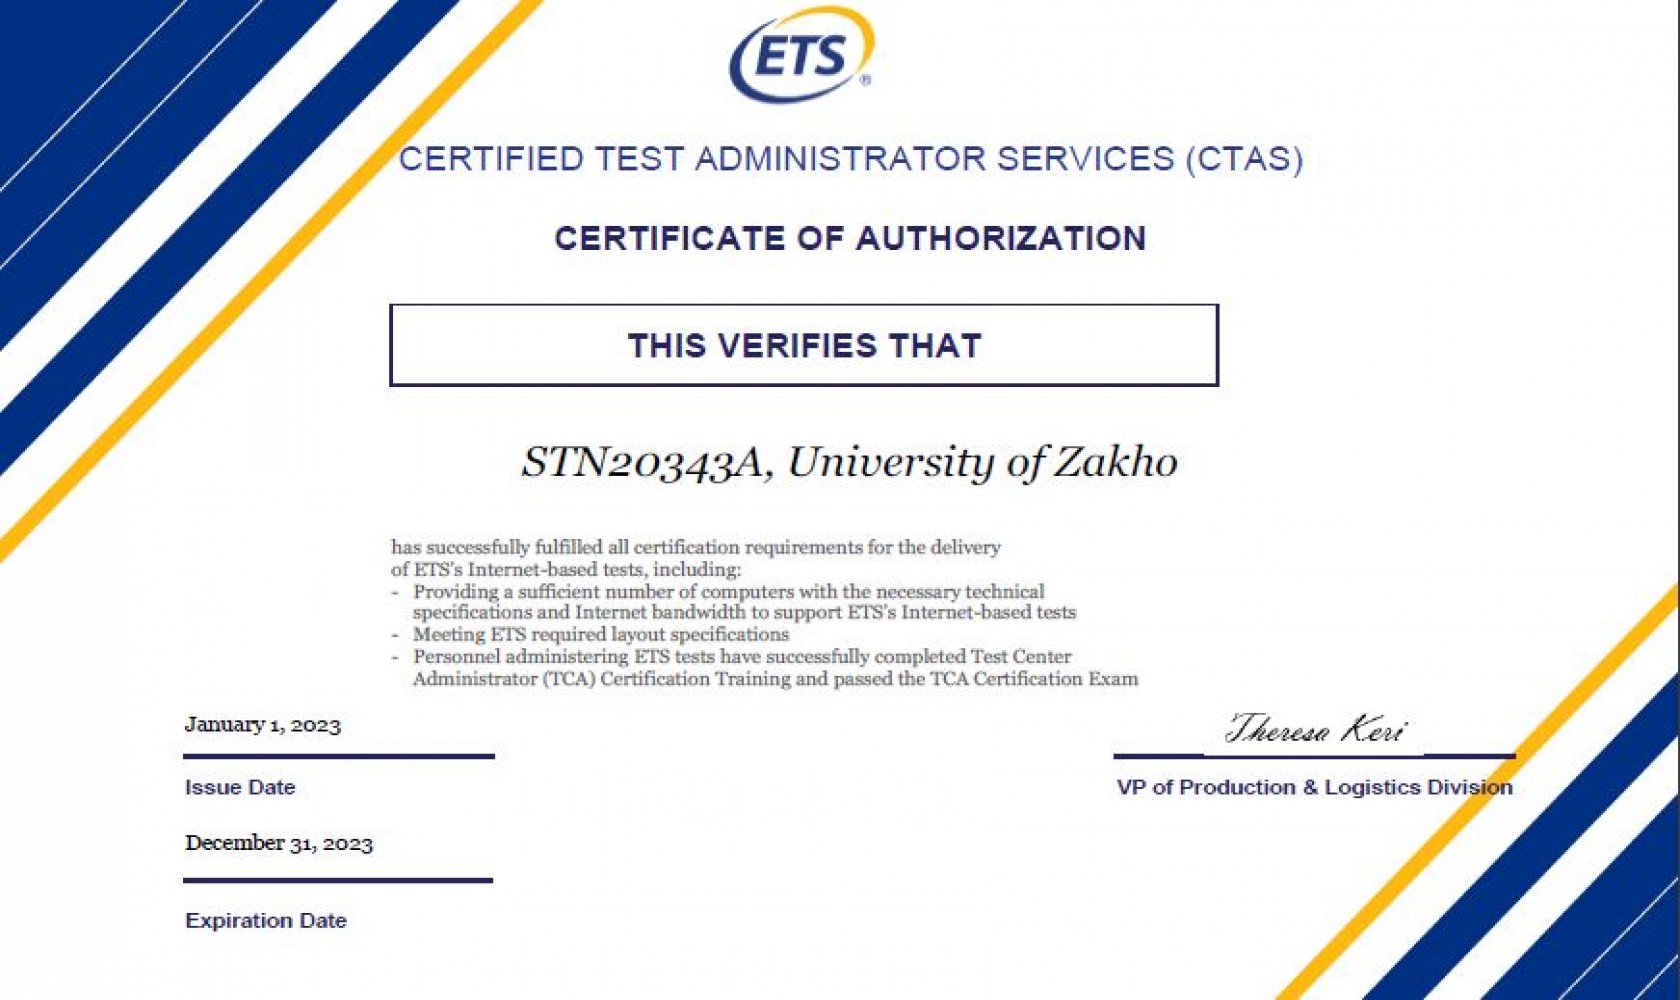 A Certificate of Authorization Was Successfully Granted by ETS